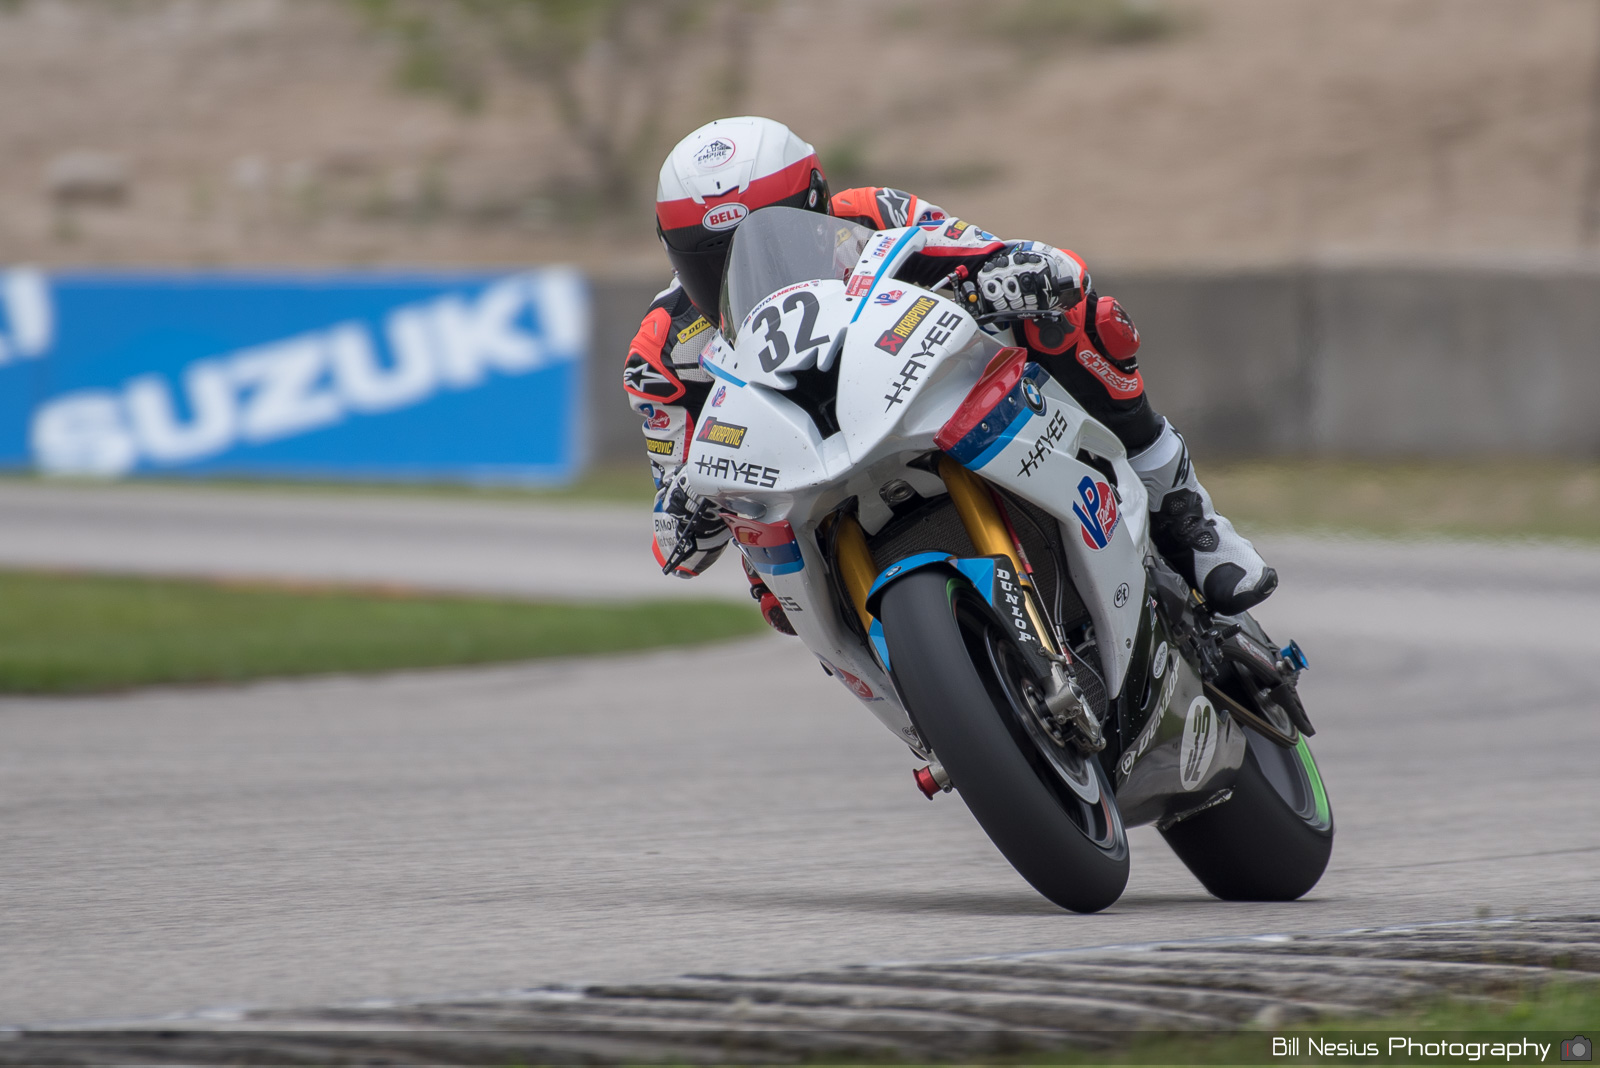 Jake Gagne on the Number 32 Scheibe Racing BMW S100RR / DSC_0883 / 4